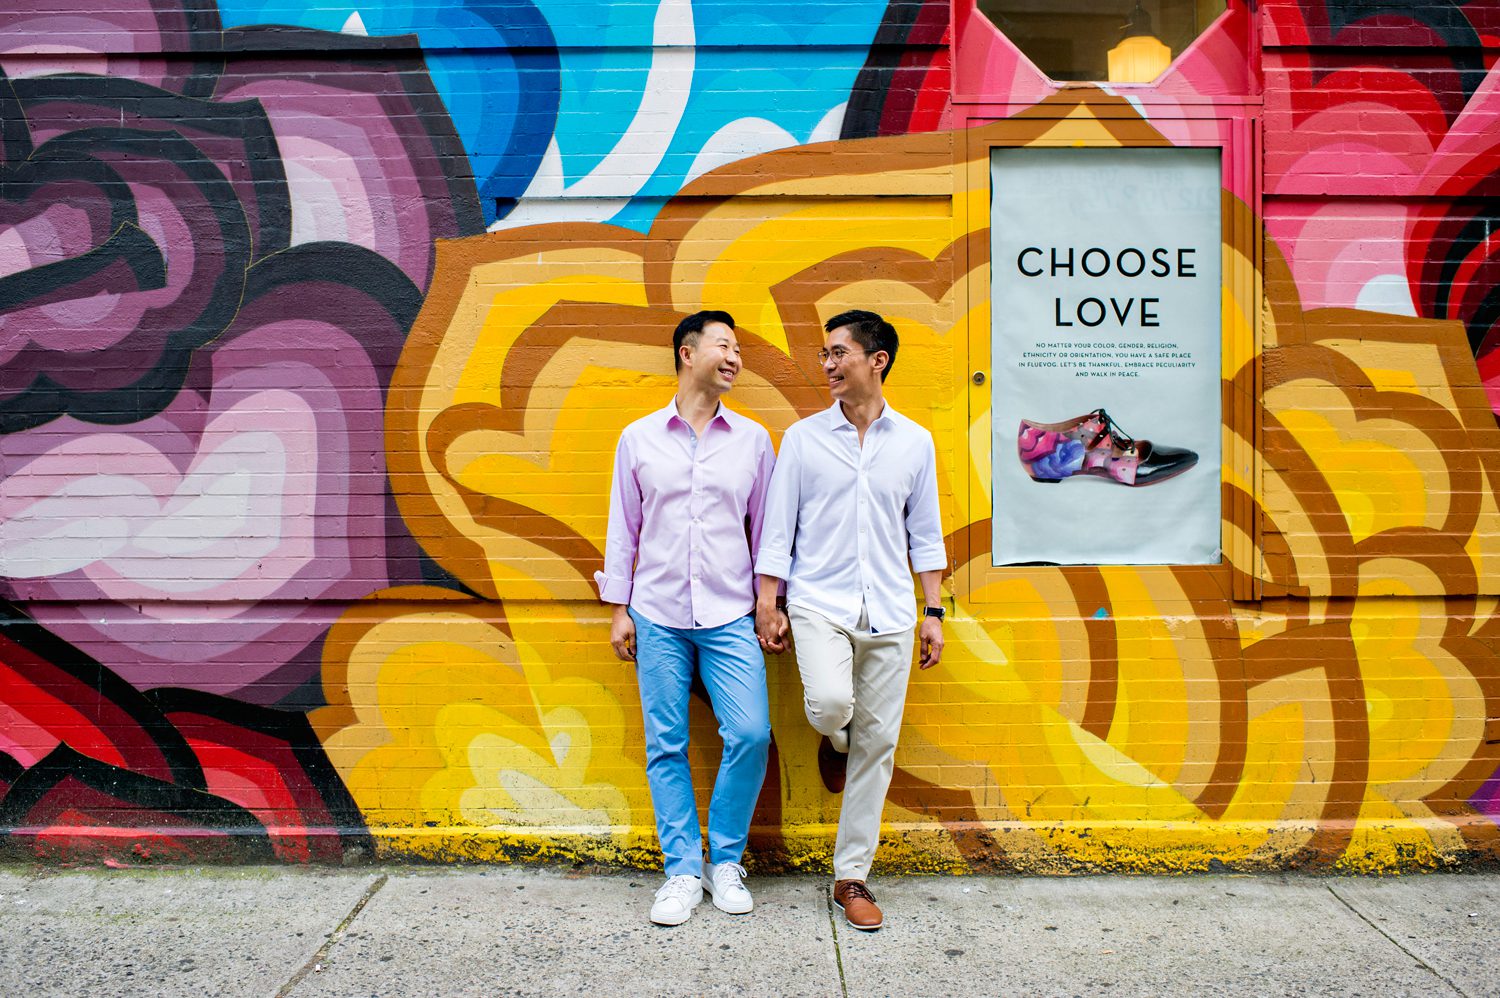 Where to Take Engagement Photos in NYC